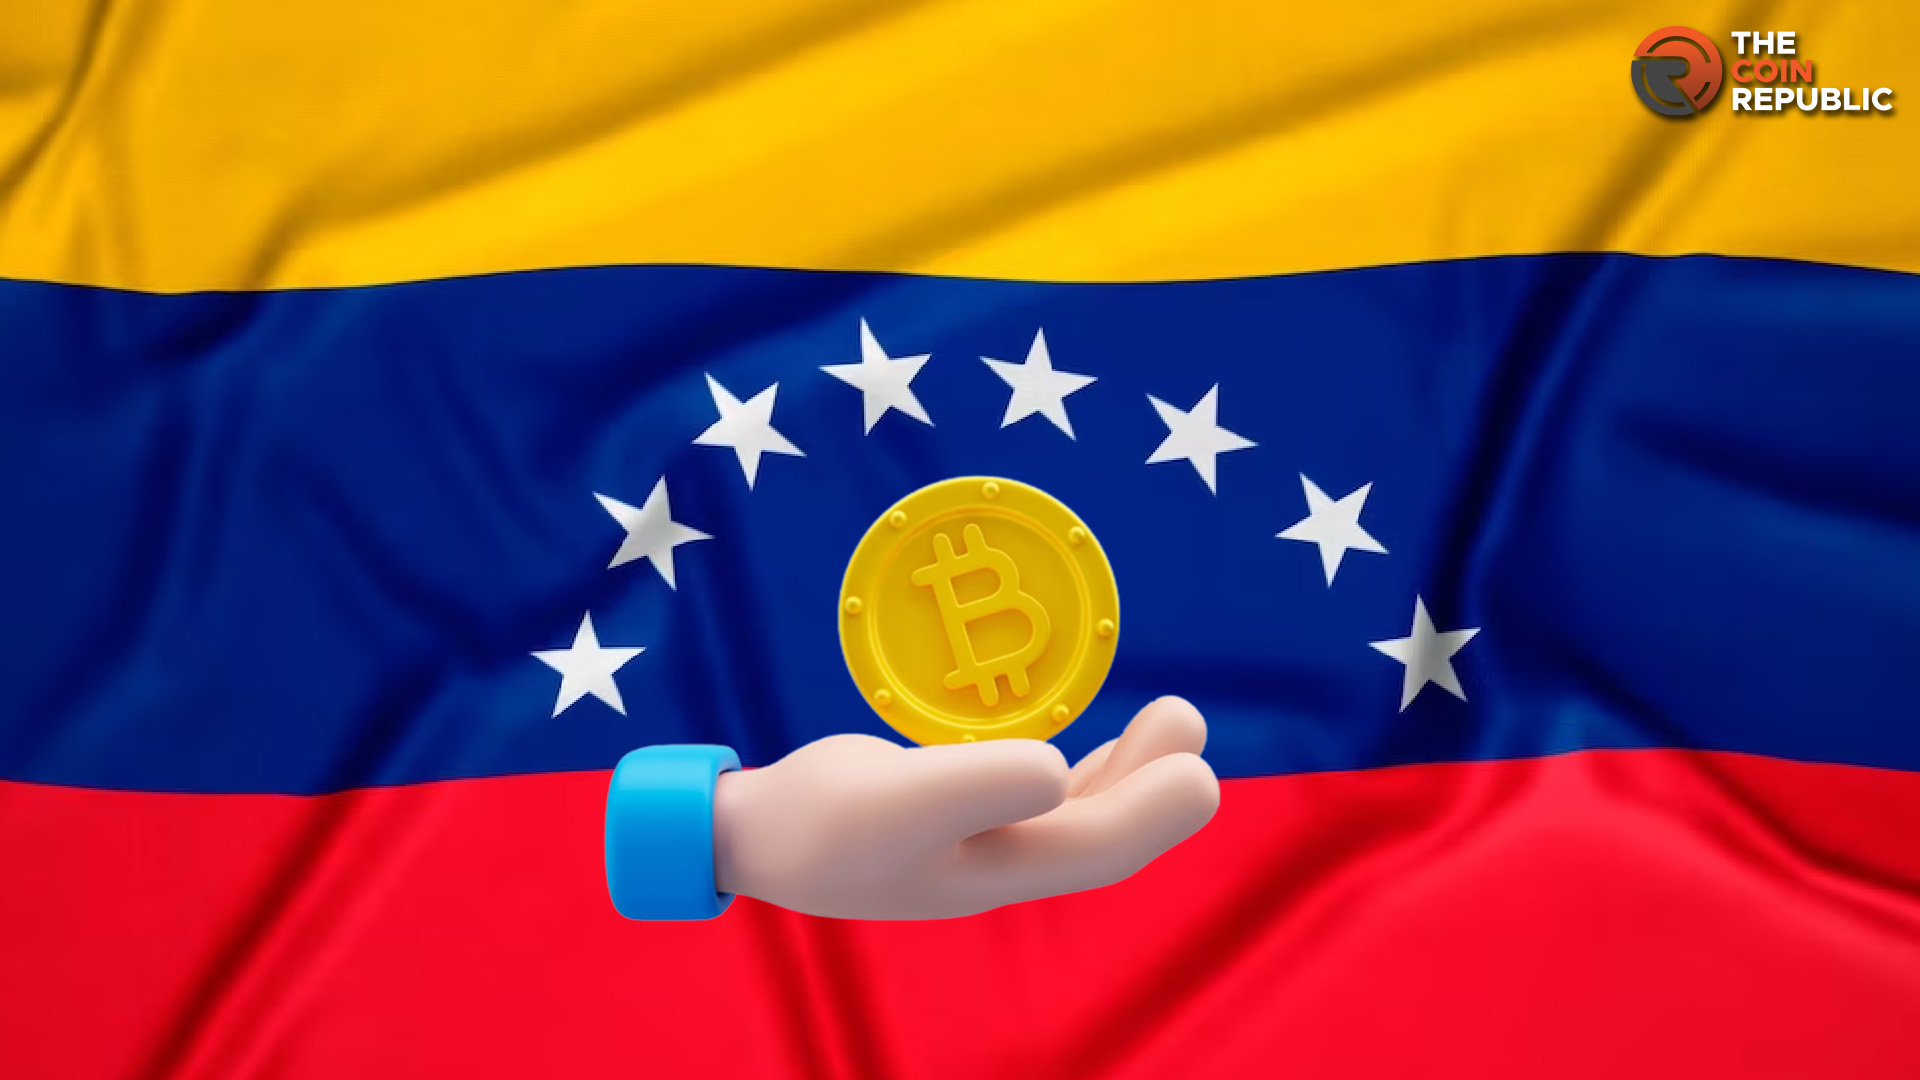 Jose Garcia, a Colombian Bitcoiner to Blend Bitcoin with Coffee  